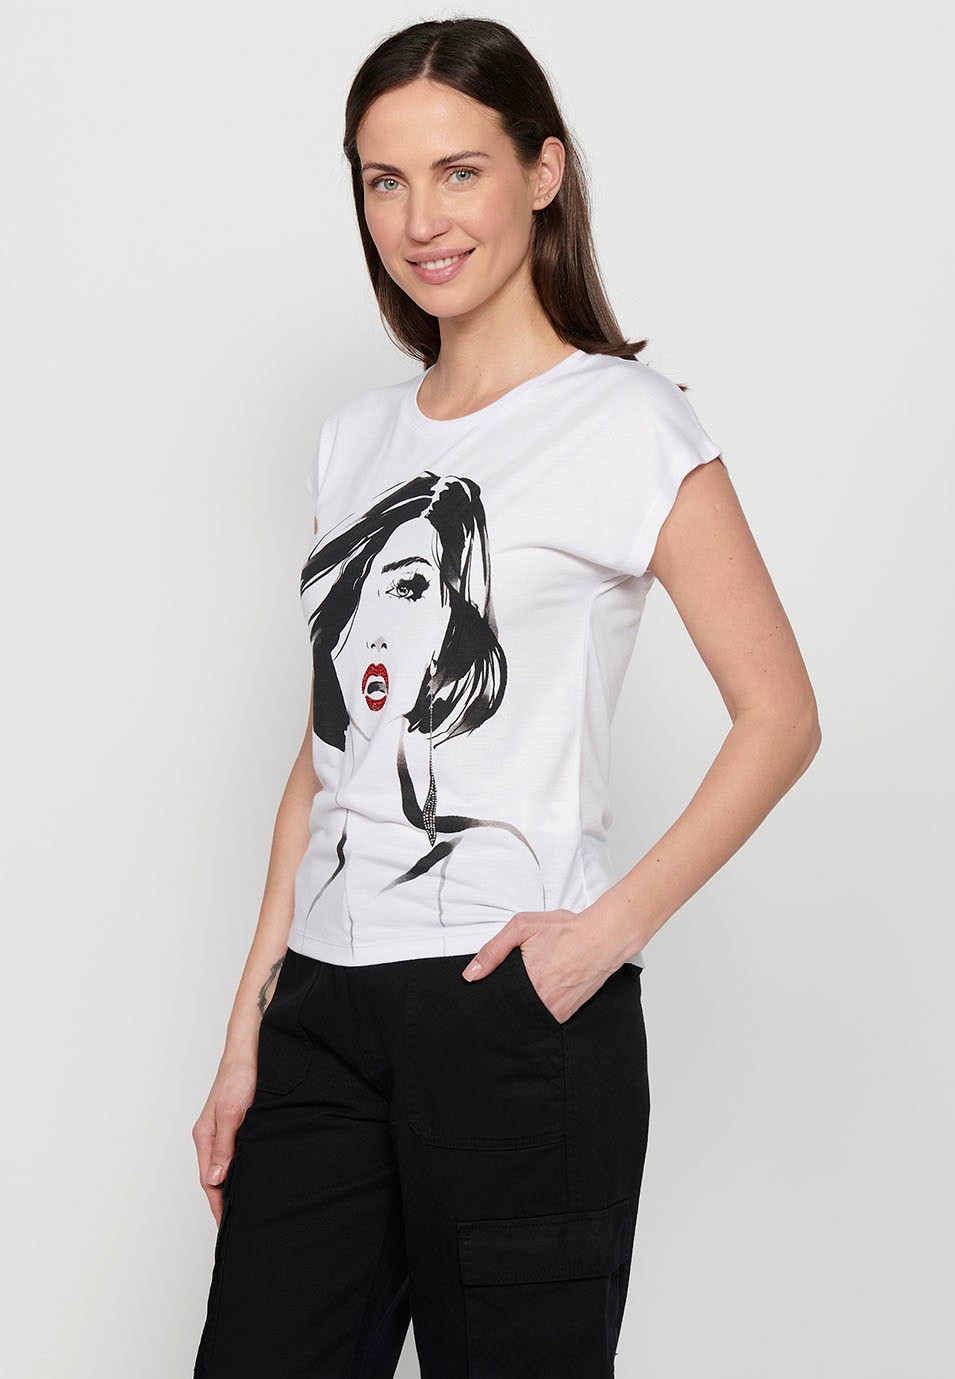 White Short Sleeve Cotton T-shirt with Round Neck and Front Print for Women